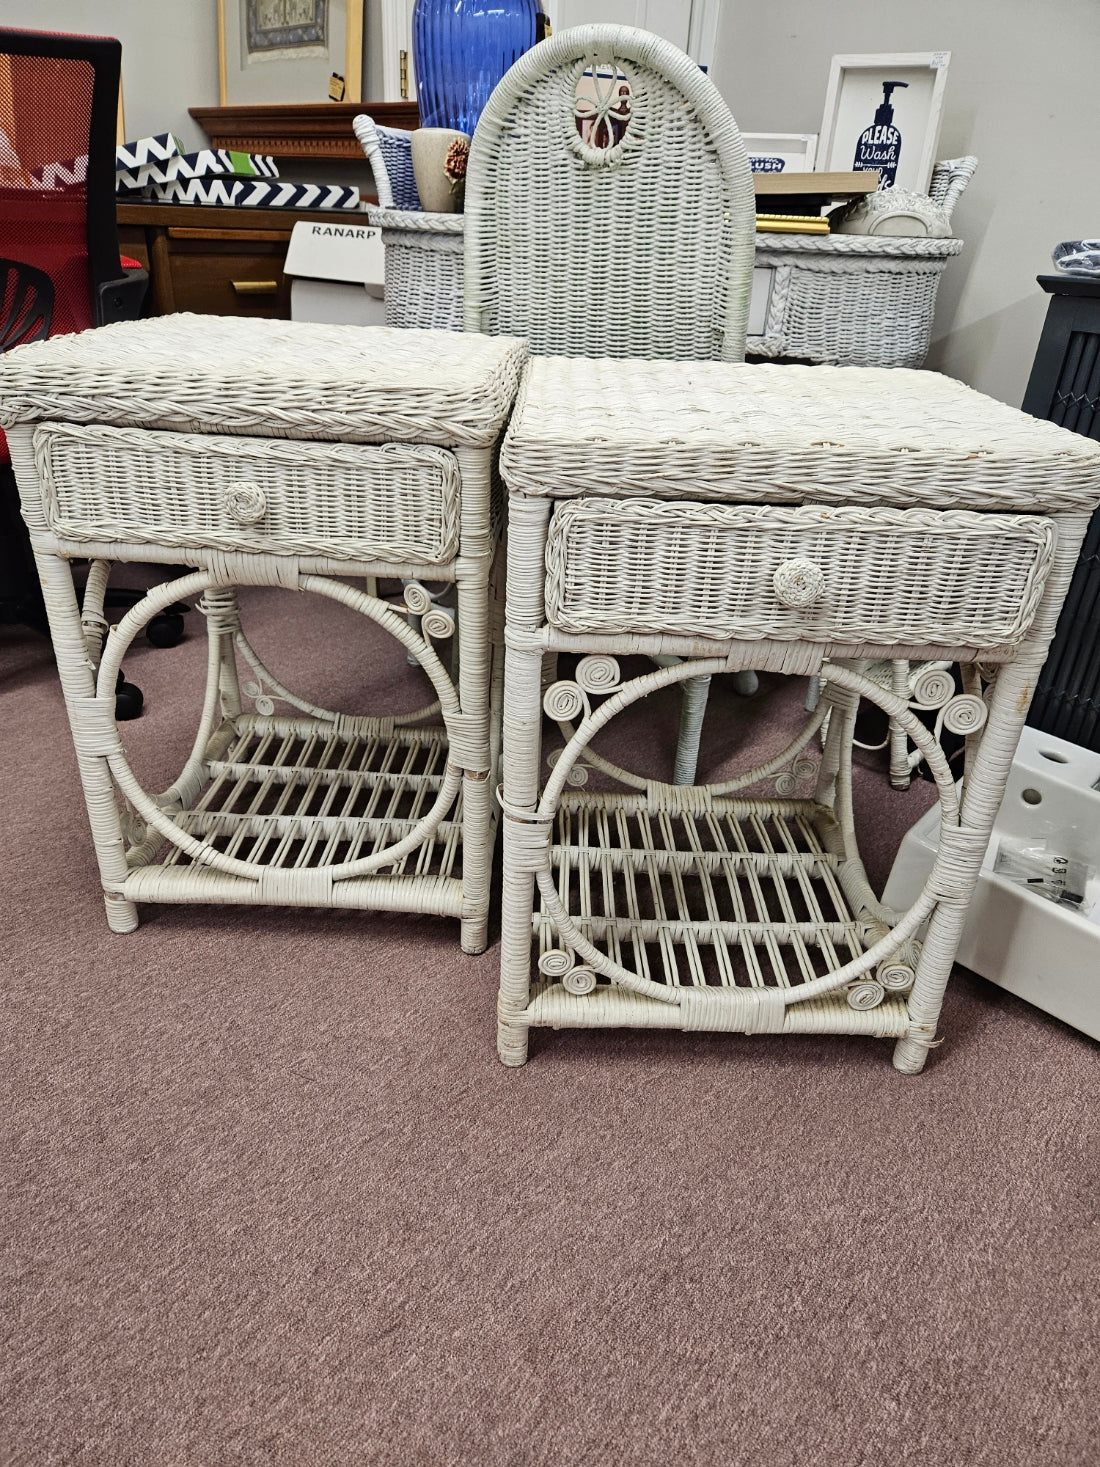 Pair of Wicker End Tables